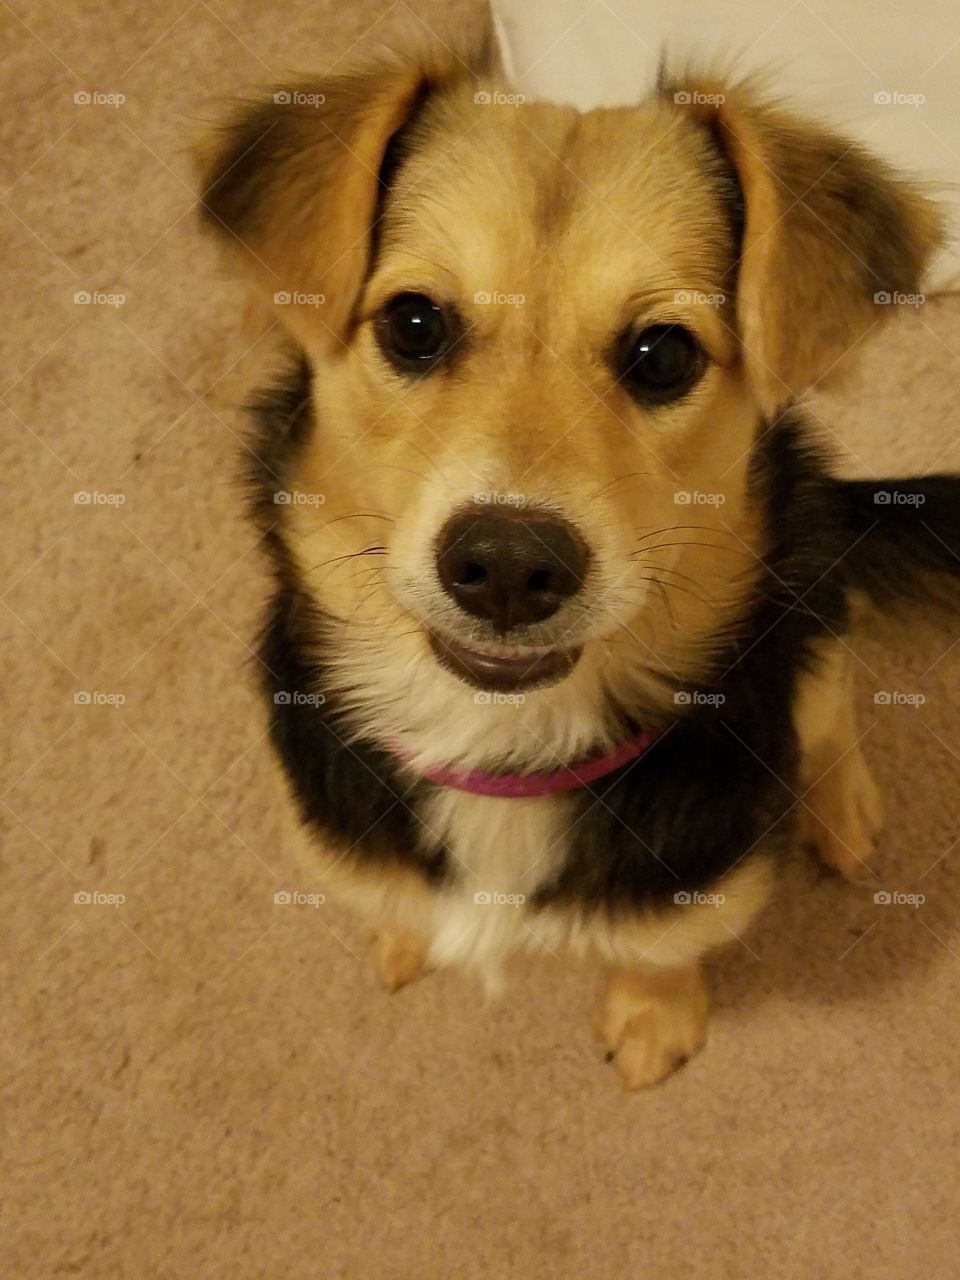 She's ready for her treat.